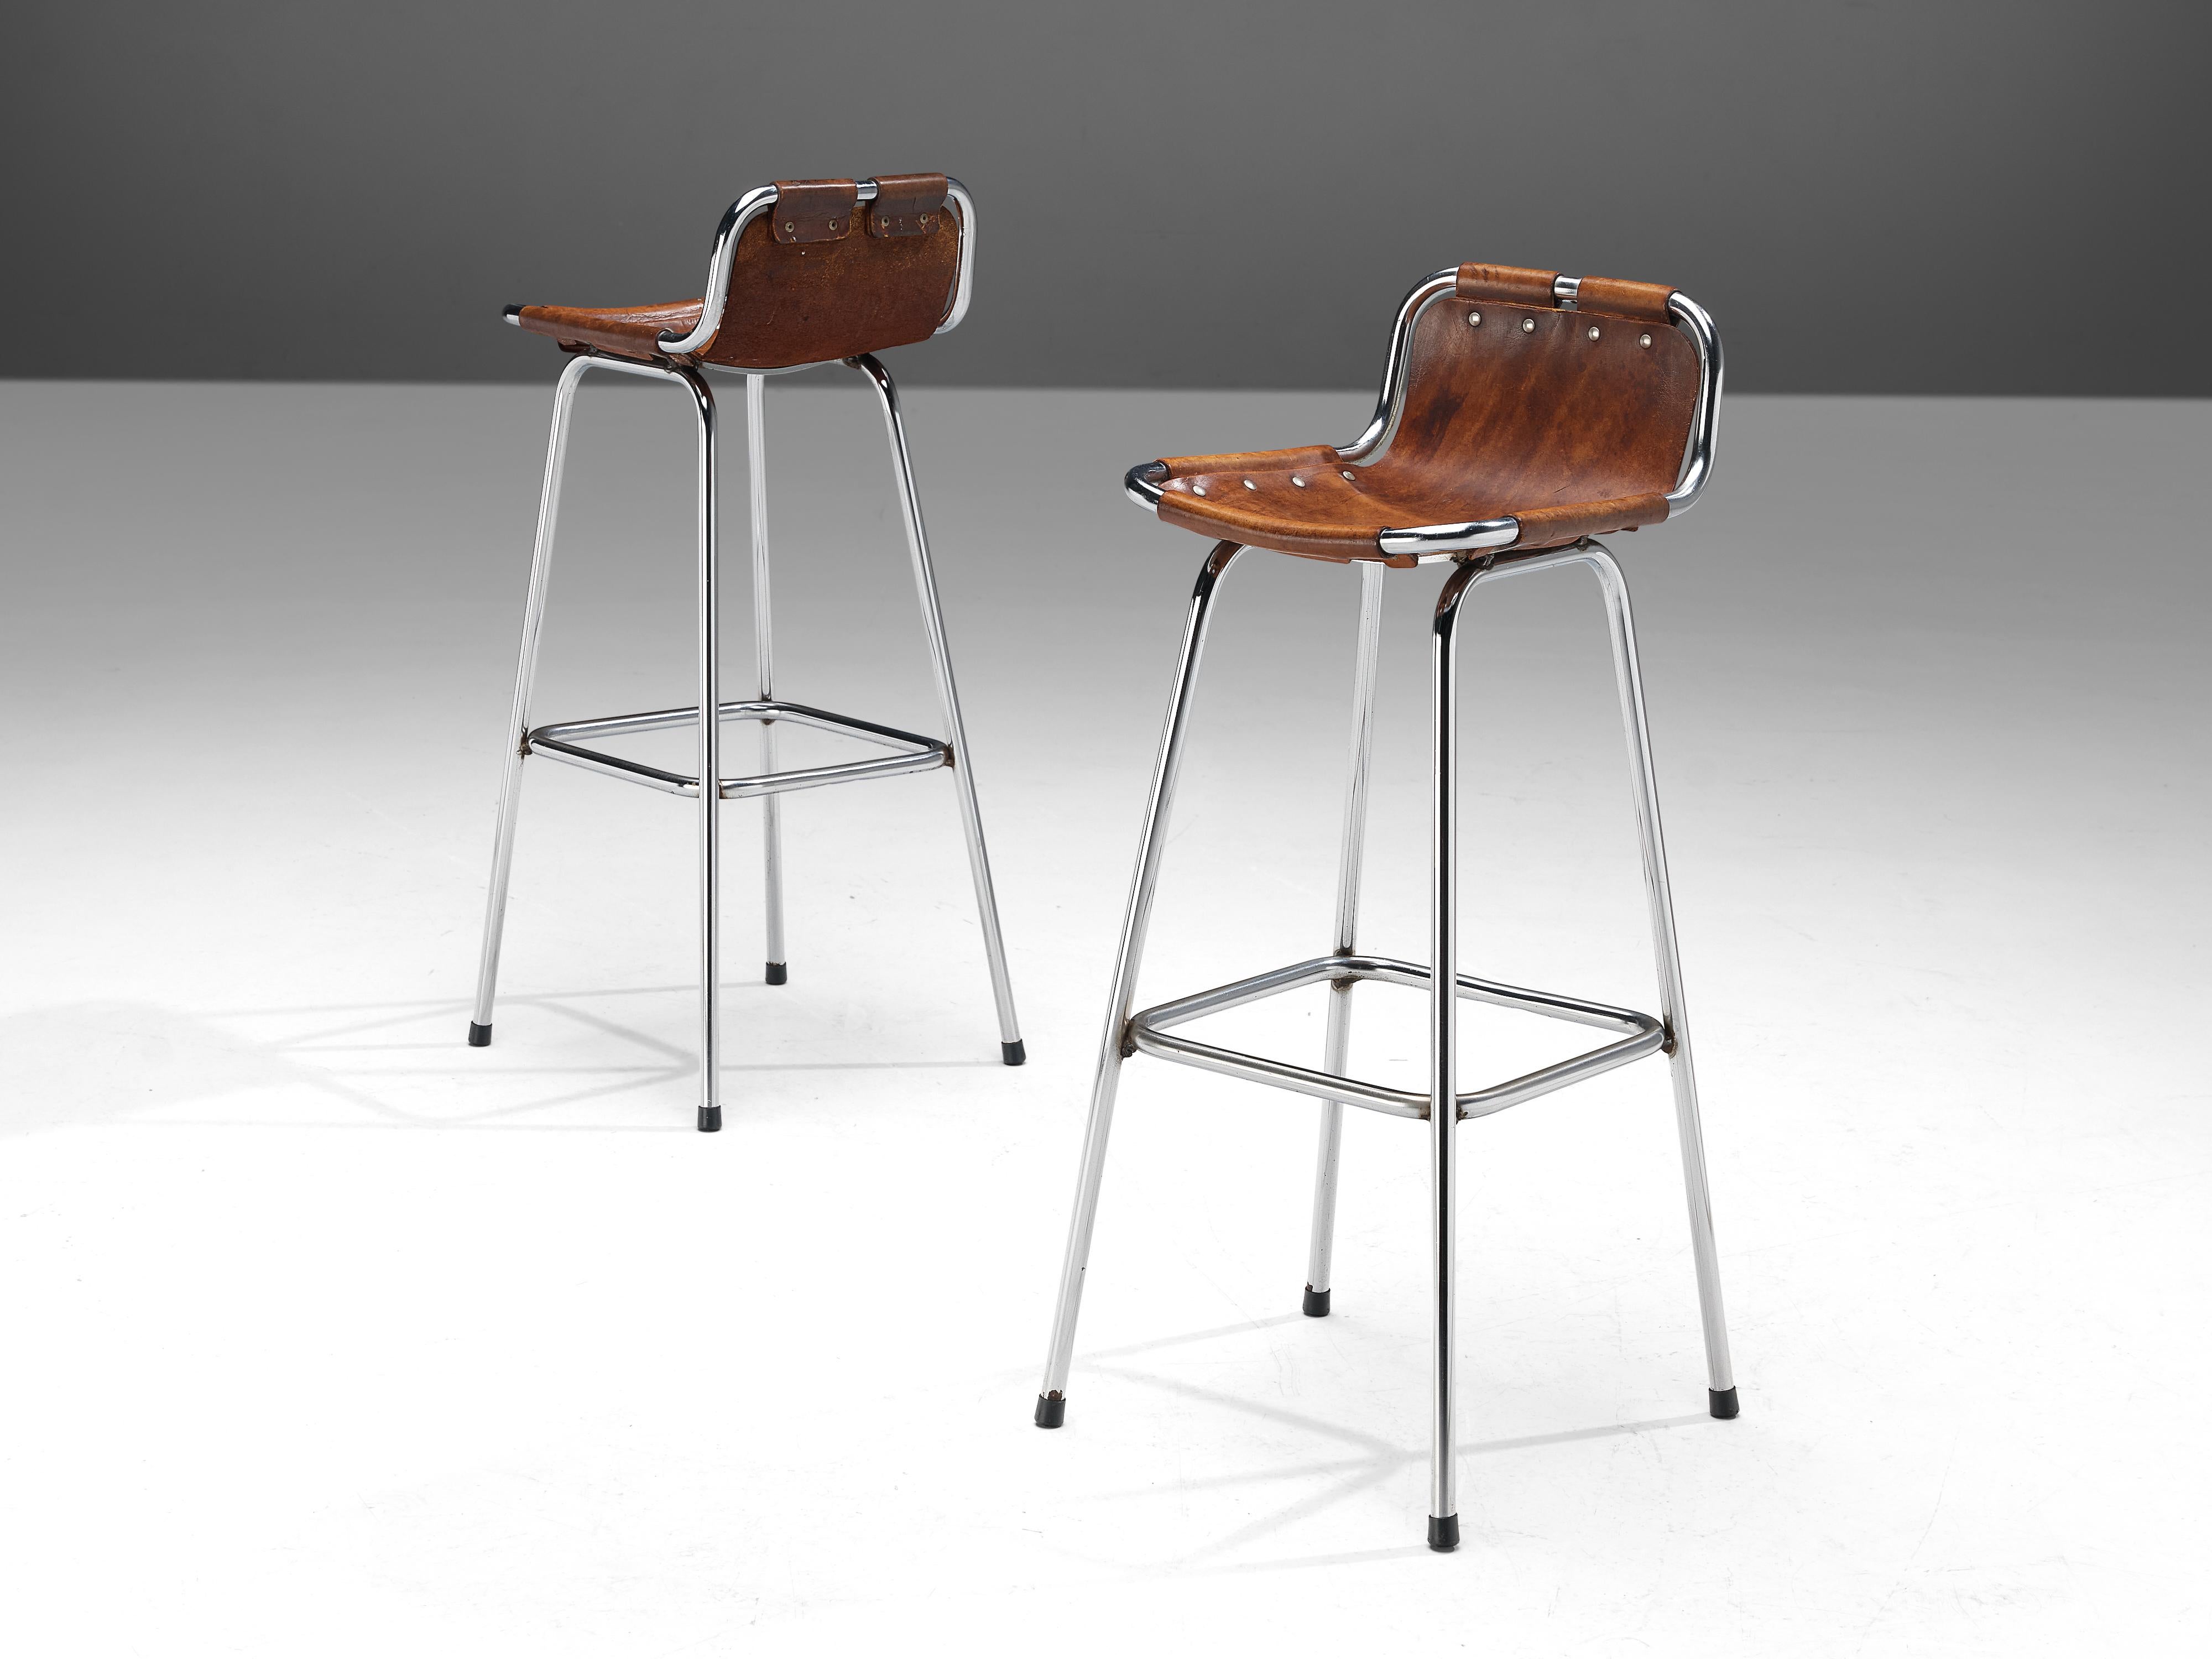 Charlotte Perriand, bar stools, lacquered steel, leather, France, circa 1970. 

Pair of stools of the famous model 'Les Arcs' by French architect and designer Charlotte Perriand. The simplistic design consist of a tubular steel frame with a